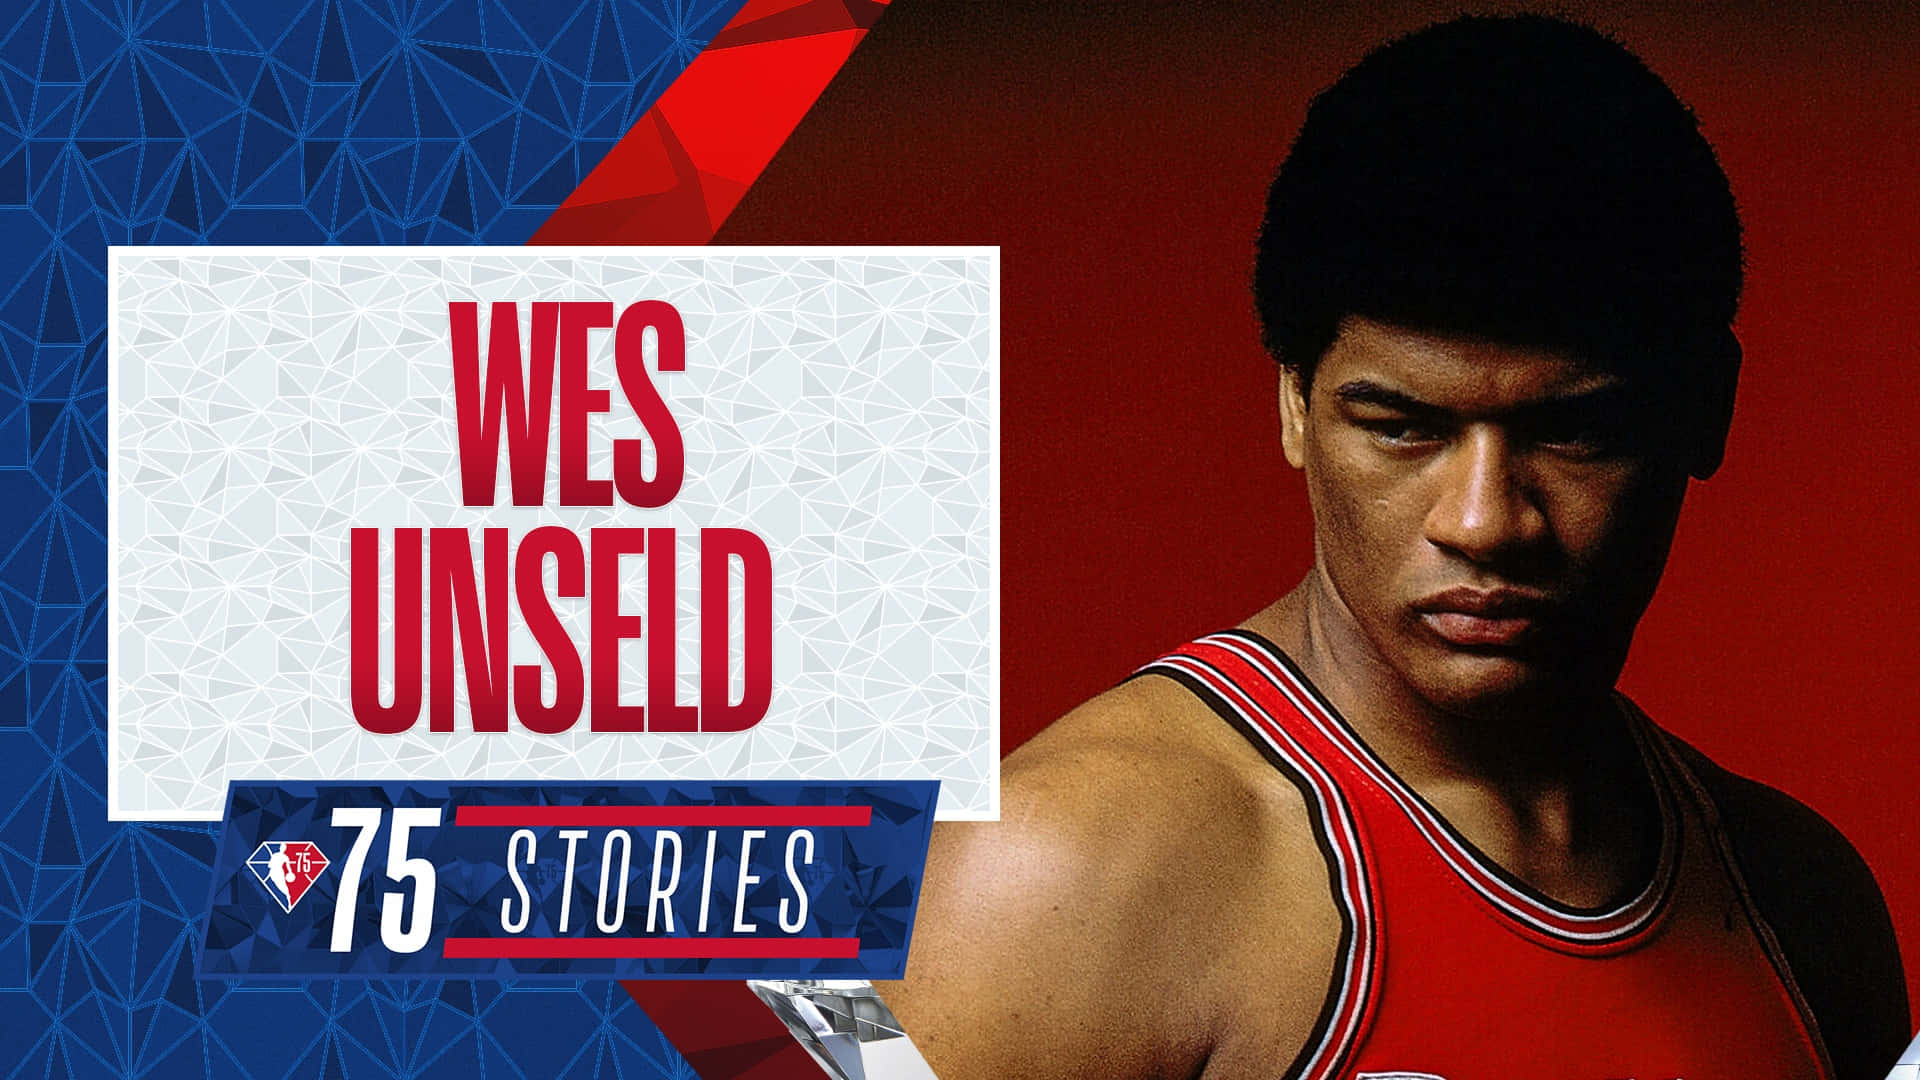 Wes Unseld NBA Iconic Stories Wallpaper